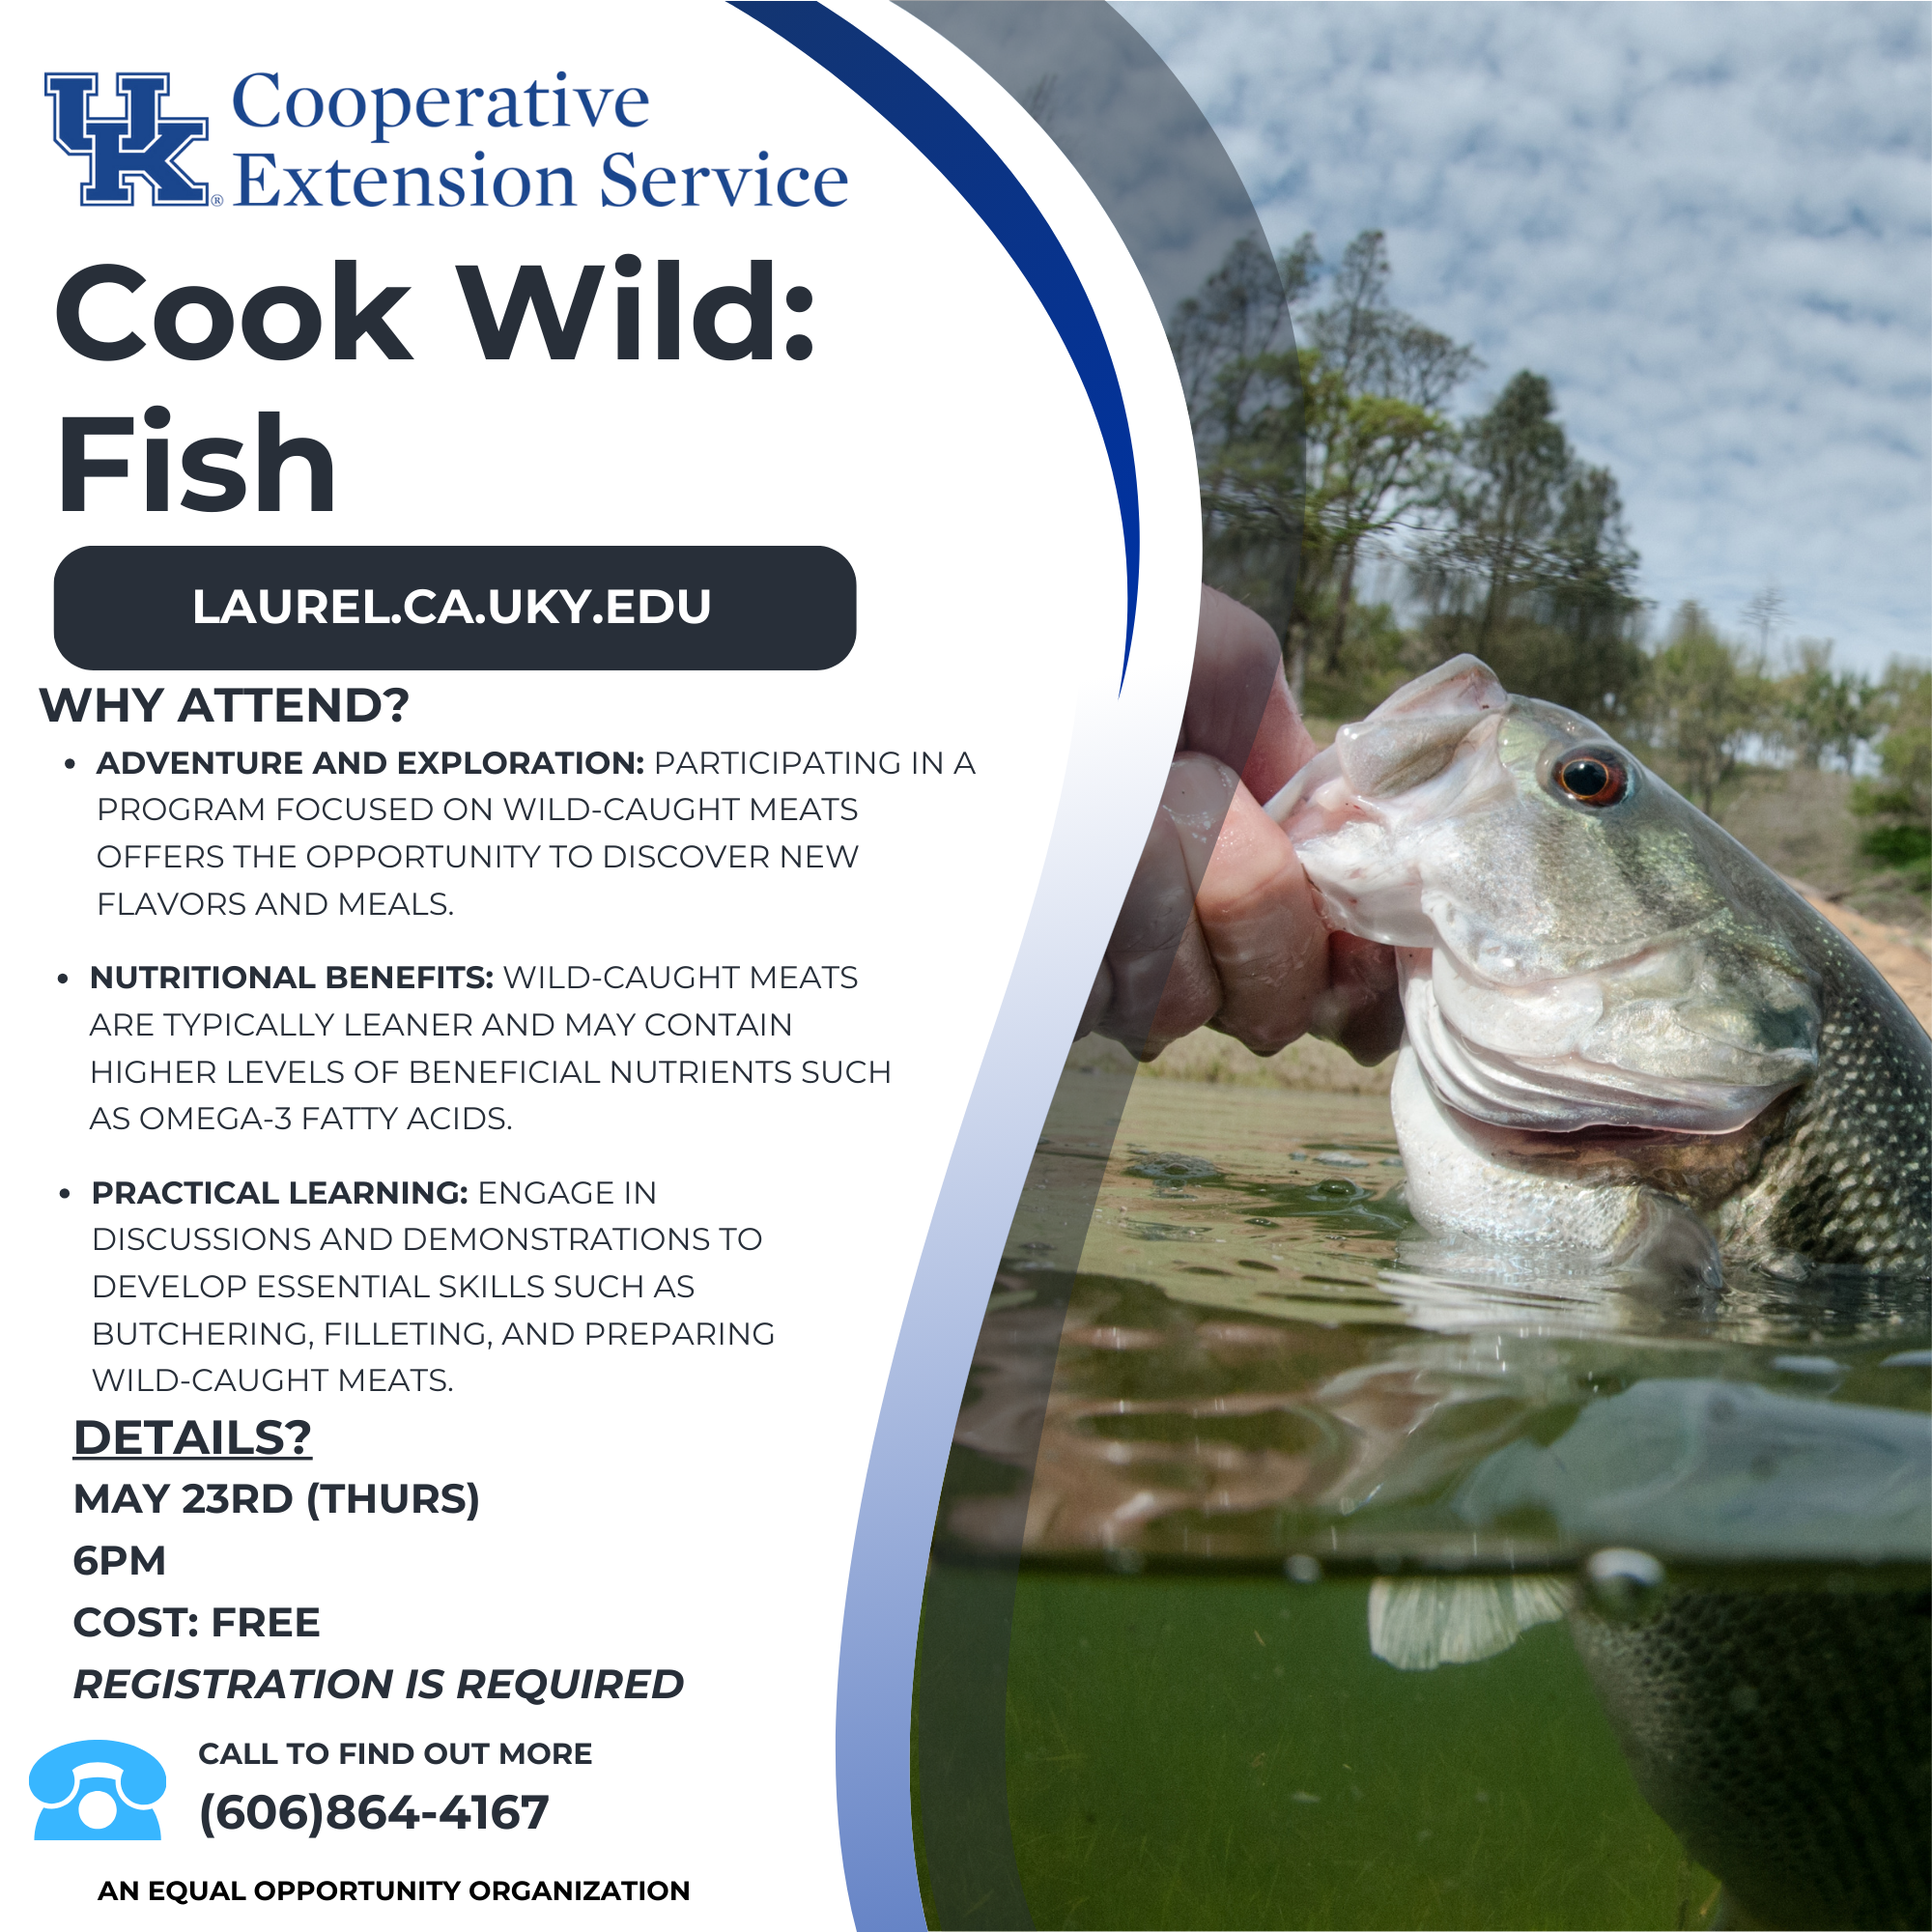 Flyer with photo of a striped bass fish and includes class date details.